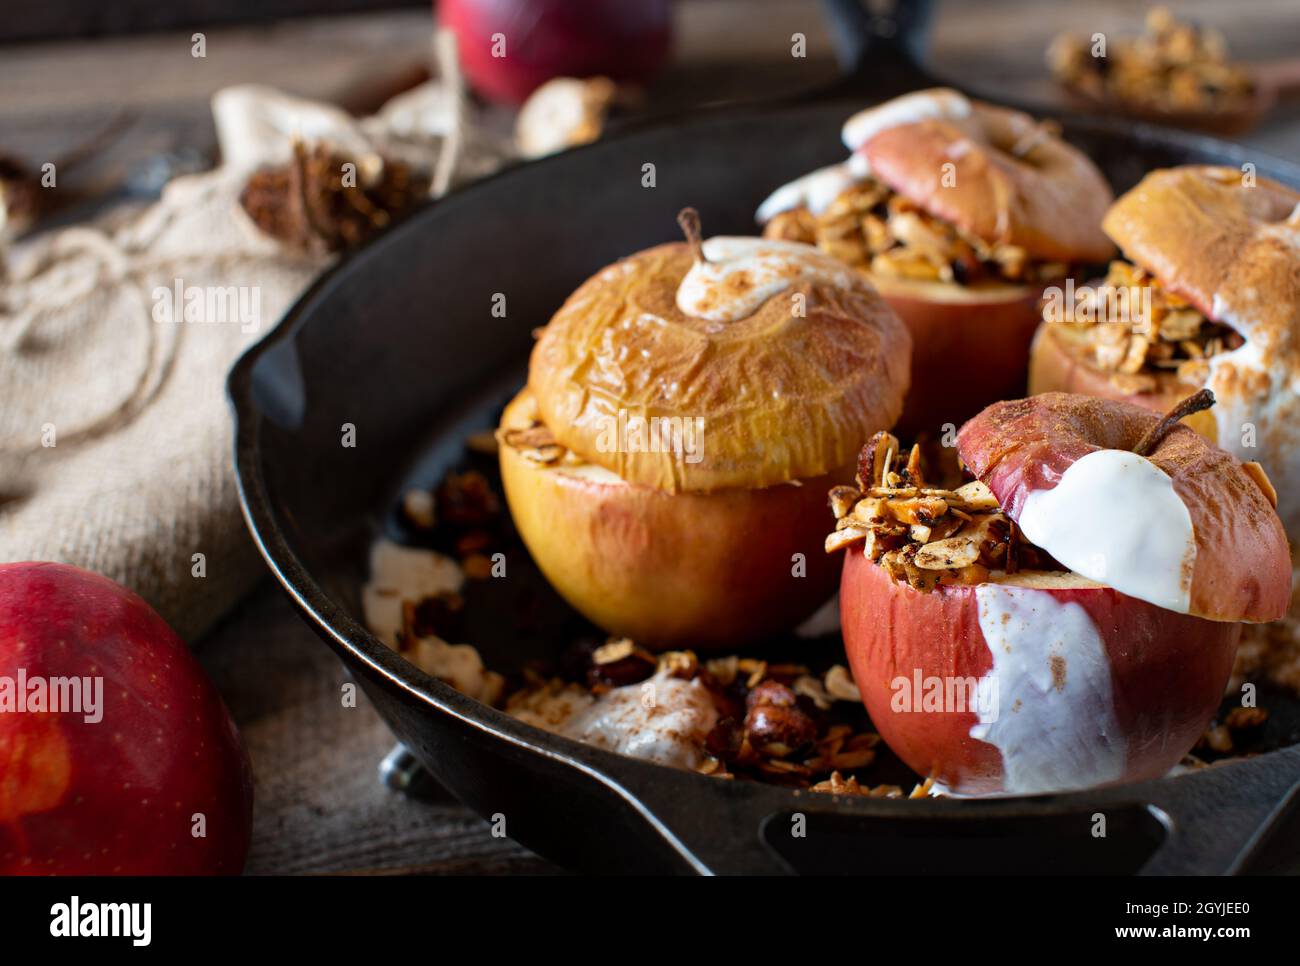 Homemade breakfast cereal with with fresh baked apples and granola topped with cinnamon and yogurt. Served on rustic and wooden table. Stock Photo